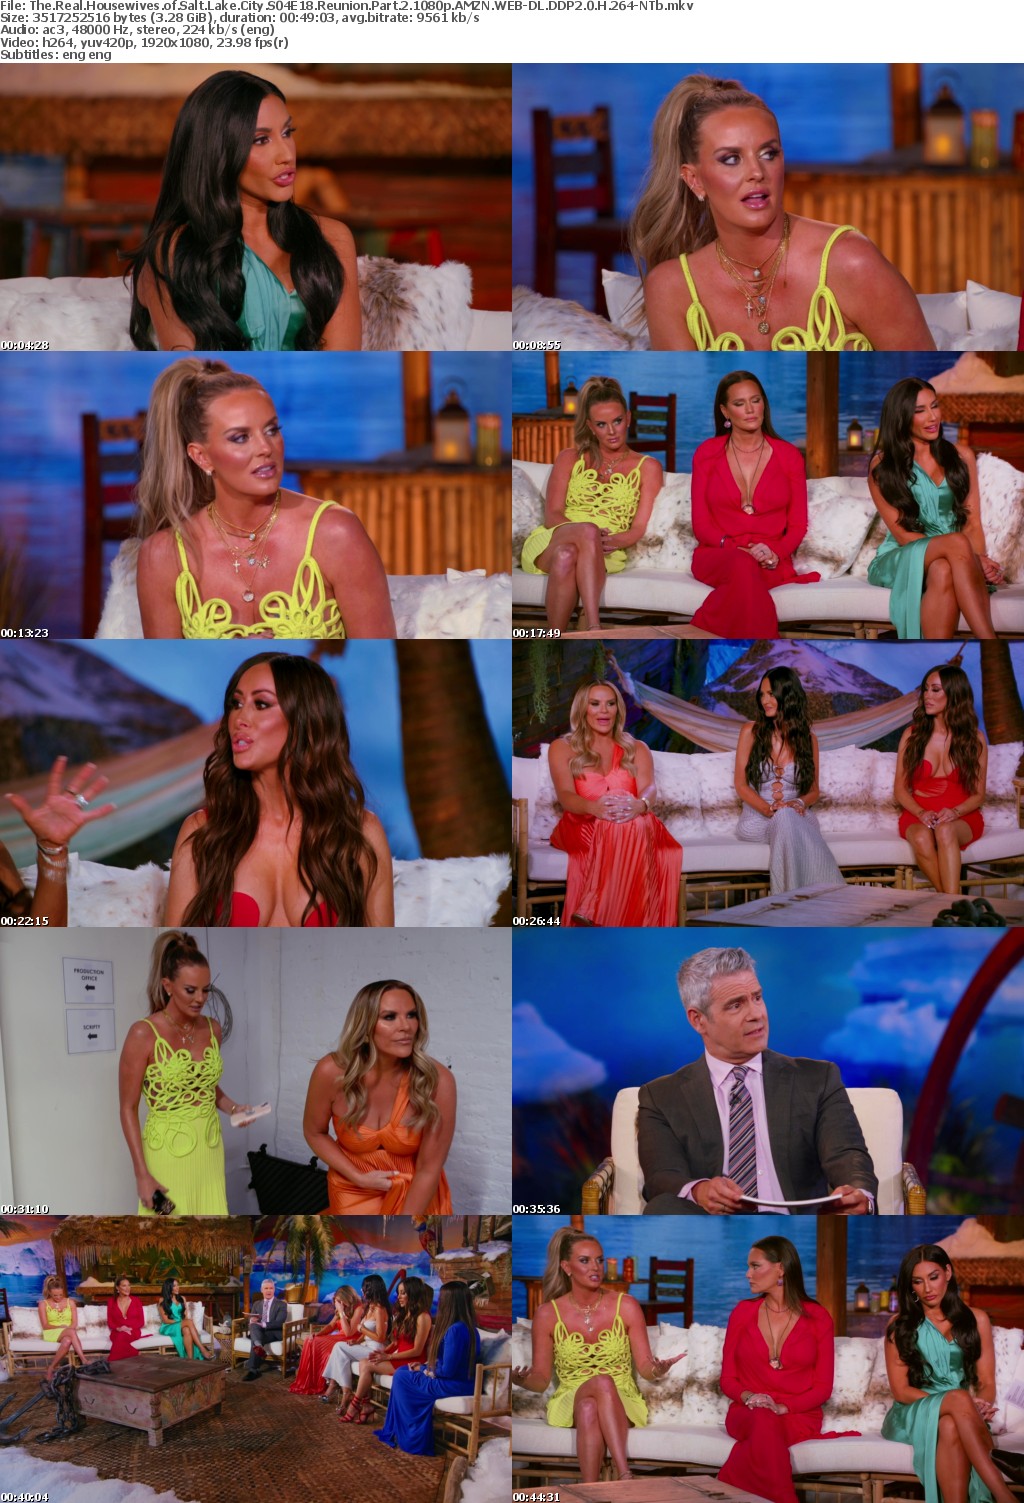 The Real Housewives of Salt Lake City S04E18 Reunion Part 2 1080p AMZN WEB-DL DDP2 0 H 264-NTb